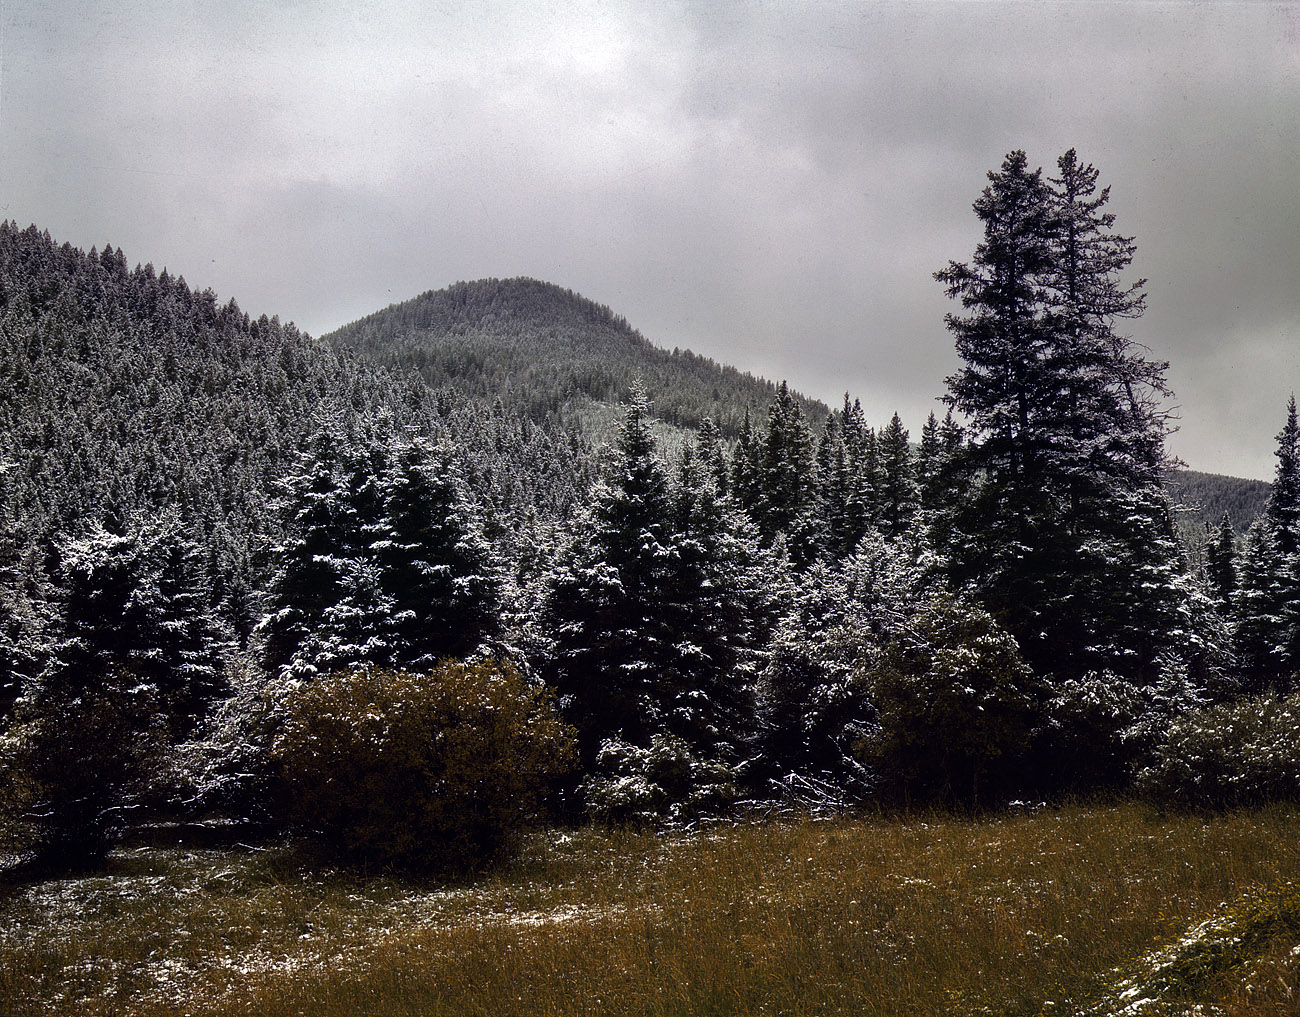 August 1942. "First snow of the season in the foothills of the Little Belt Mountains. Lewis and Clark National Forest, Meagher County, Montana." 4x5 Kodachrome transparency by Russell Lee for the Farm Security Administration. View full size.